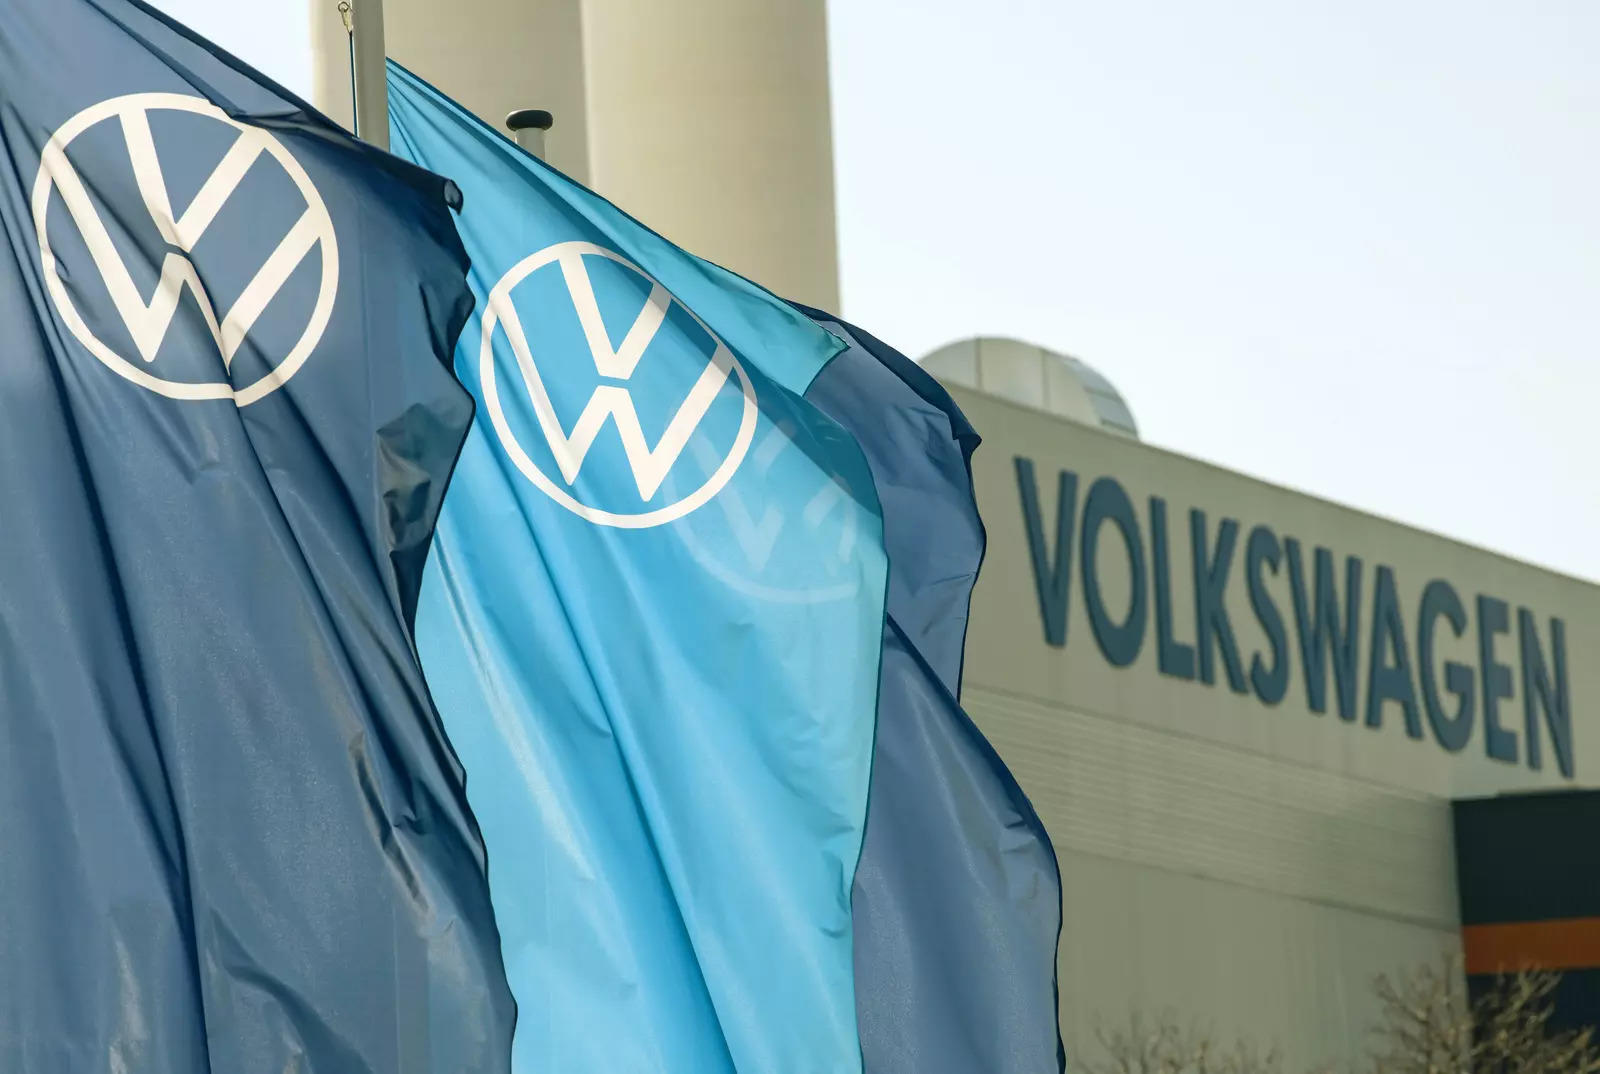  Volkswagen reported third-quarter earnings of 4.3 billion euros ($4.29 billion), following 1.6 billion in one-off effects from the suspension of Russian activities and the Porsche AG listing.